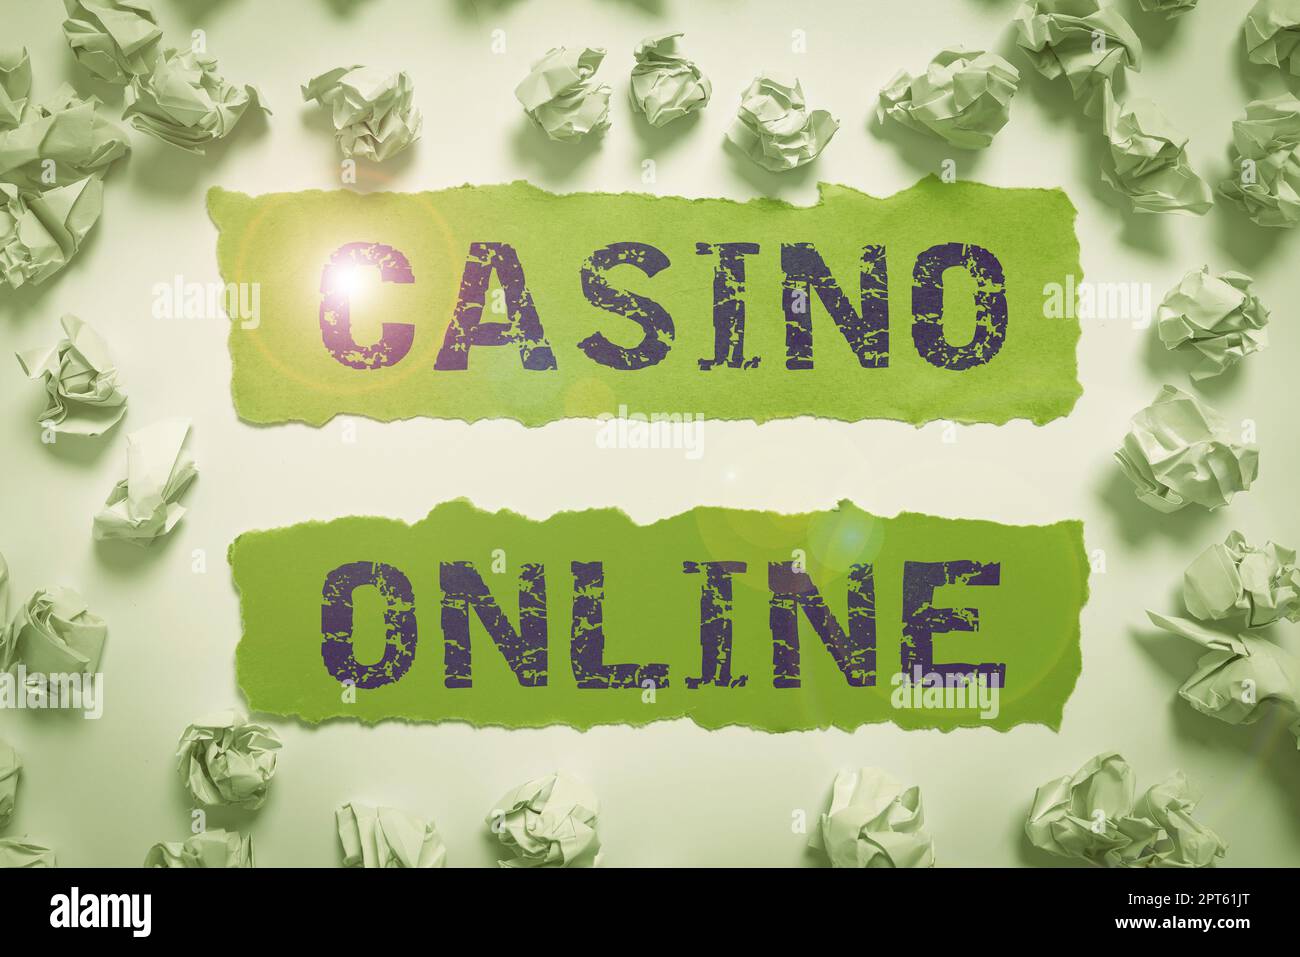 Text caption presenting Casino Online, Internet Concept Computer Poker Game Gamble Royal Bet Lotto High Stakes Stock Photo